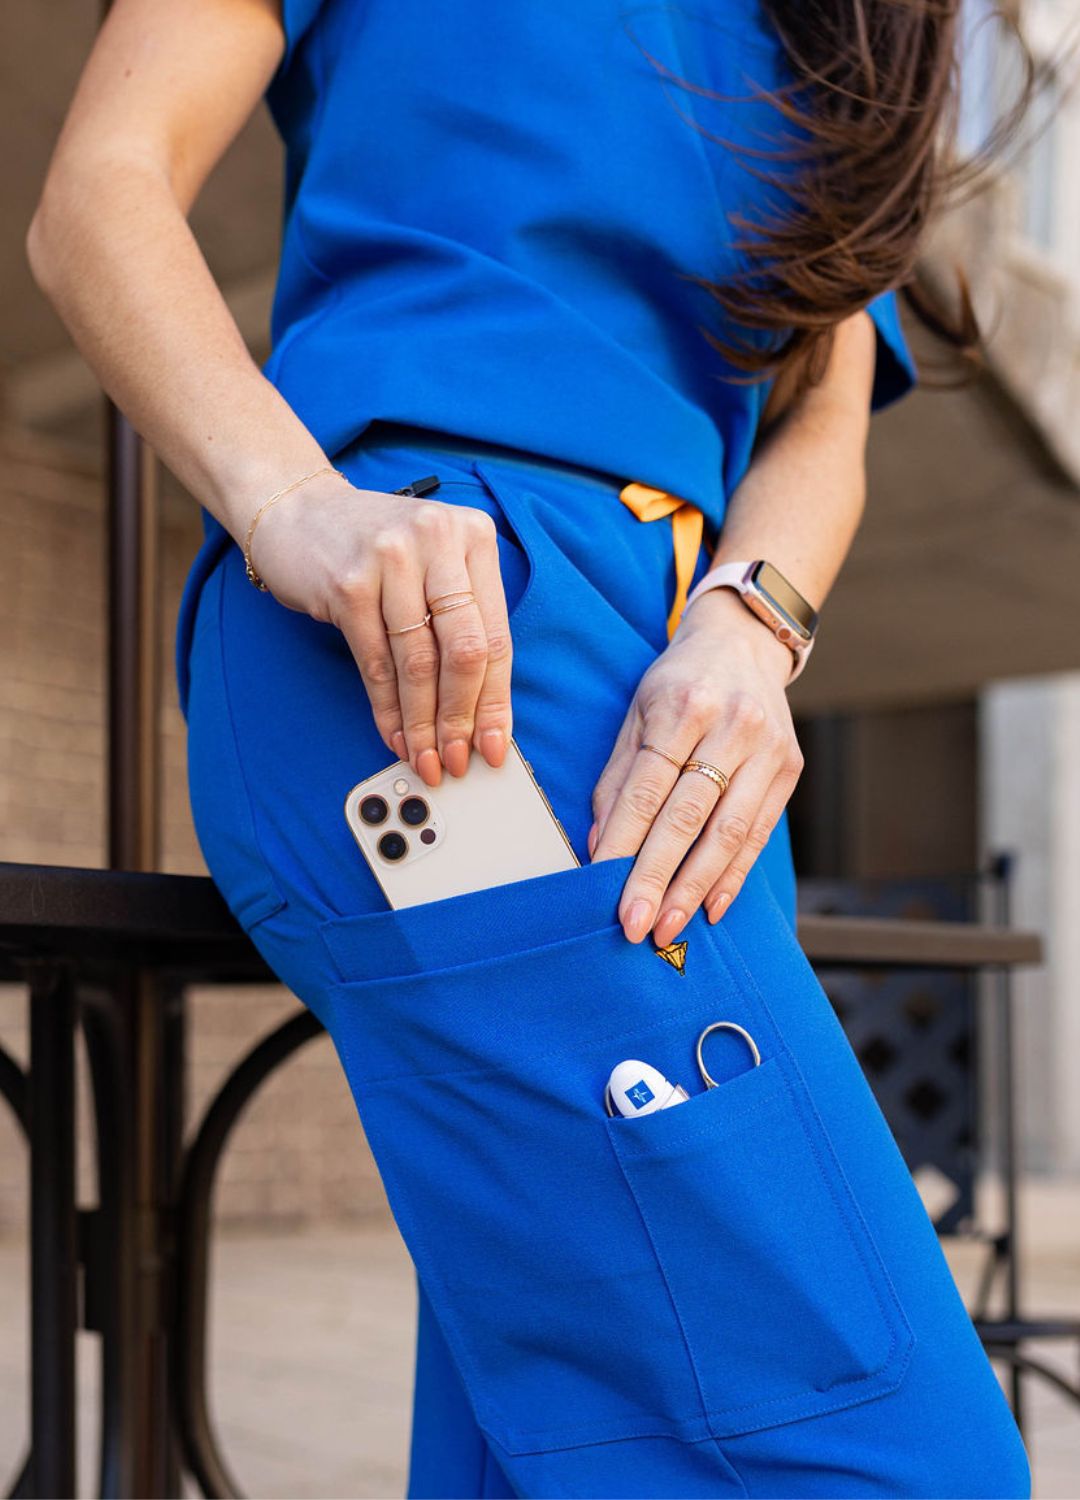 Bodie scrub pants for women are a regular fit for most nurses.